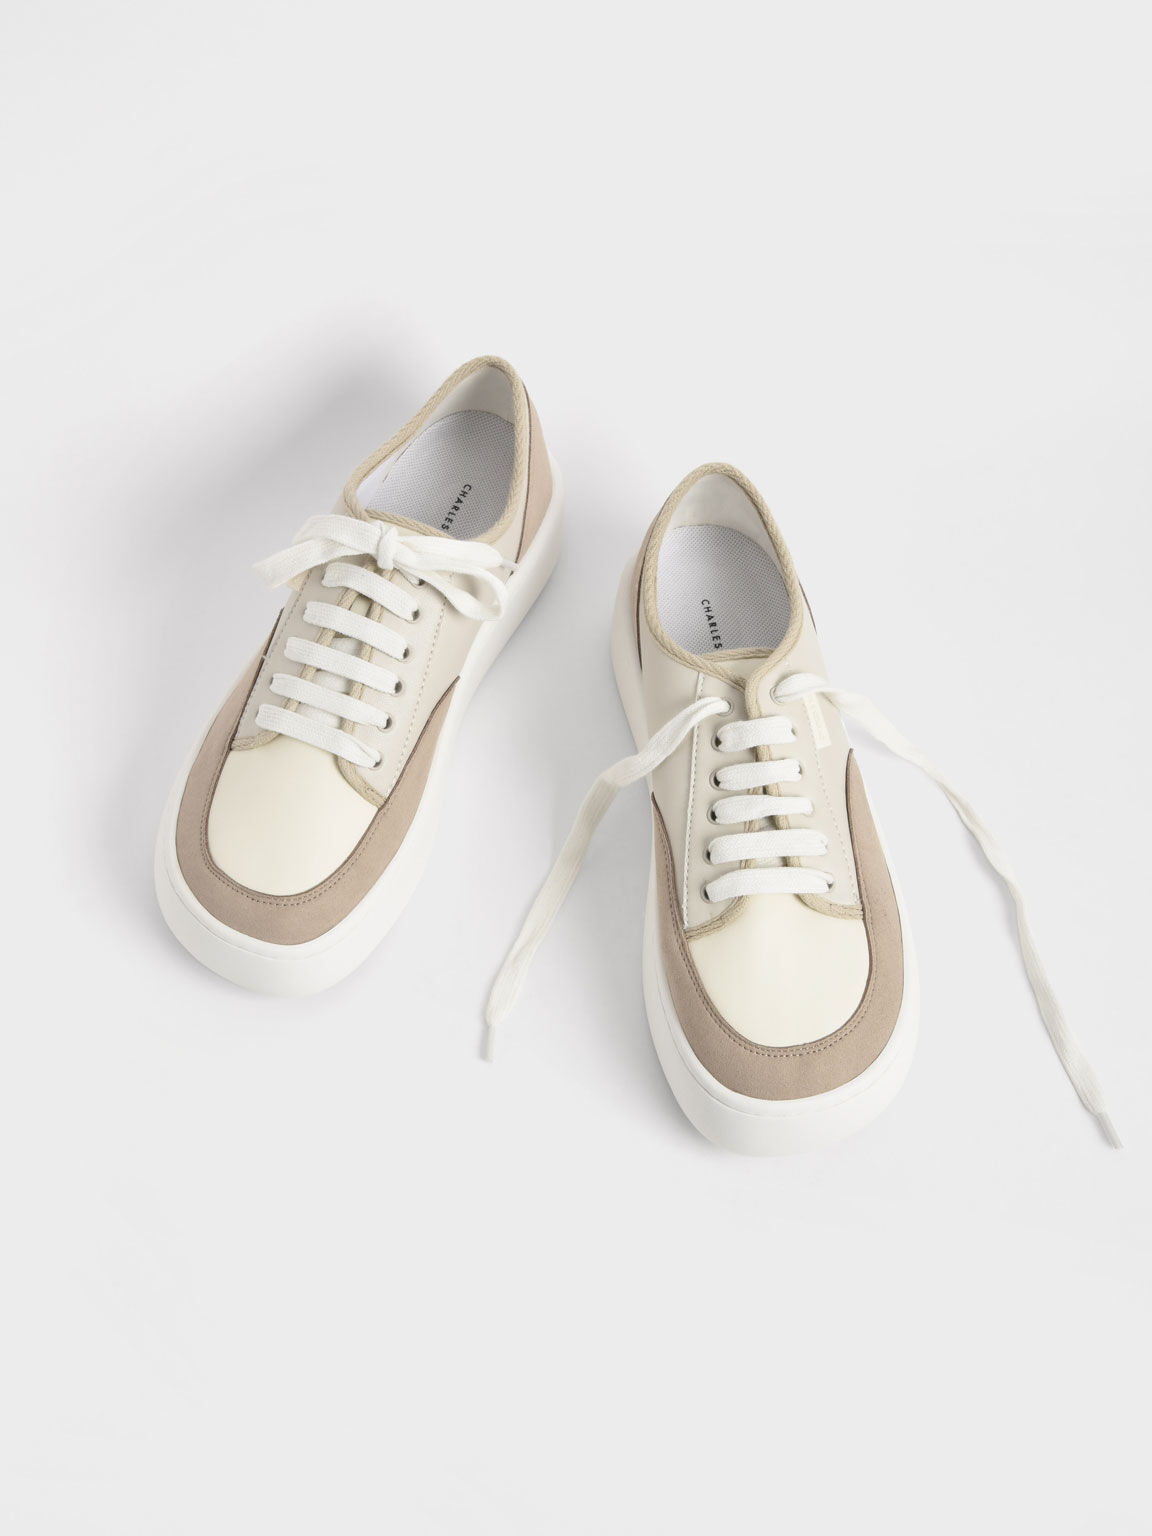 Skye Two-Tone Cotton Sneakers, Taupe, hi-res